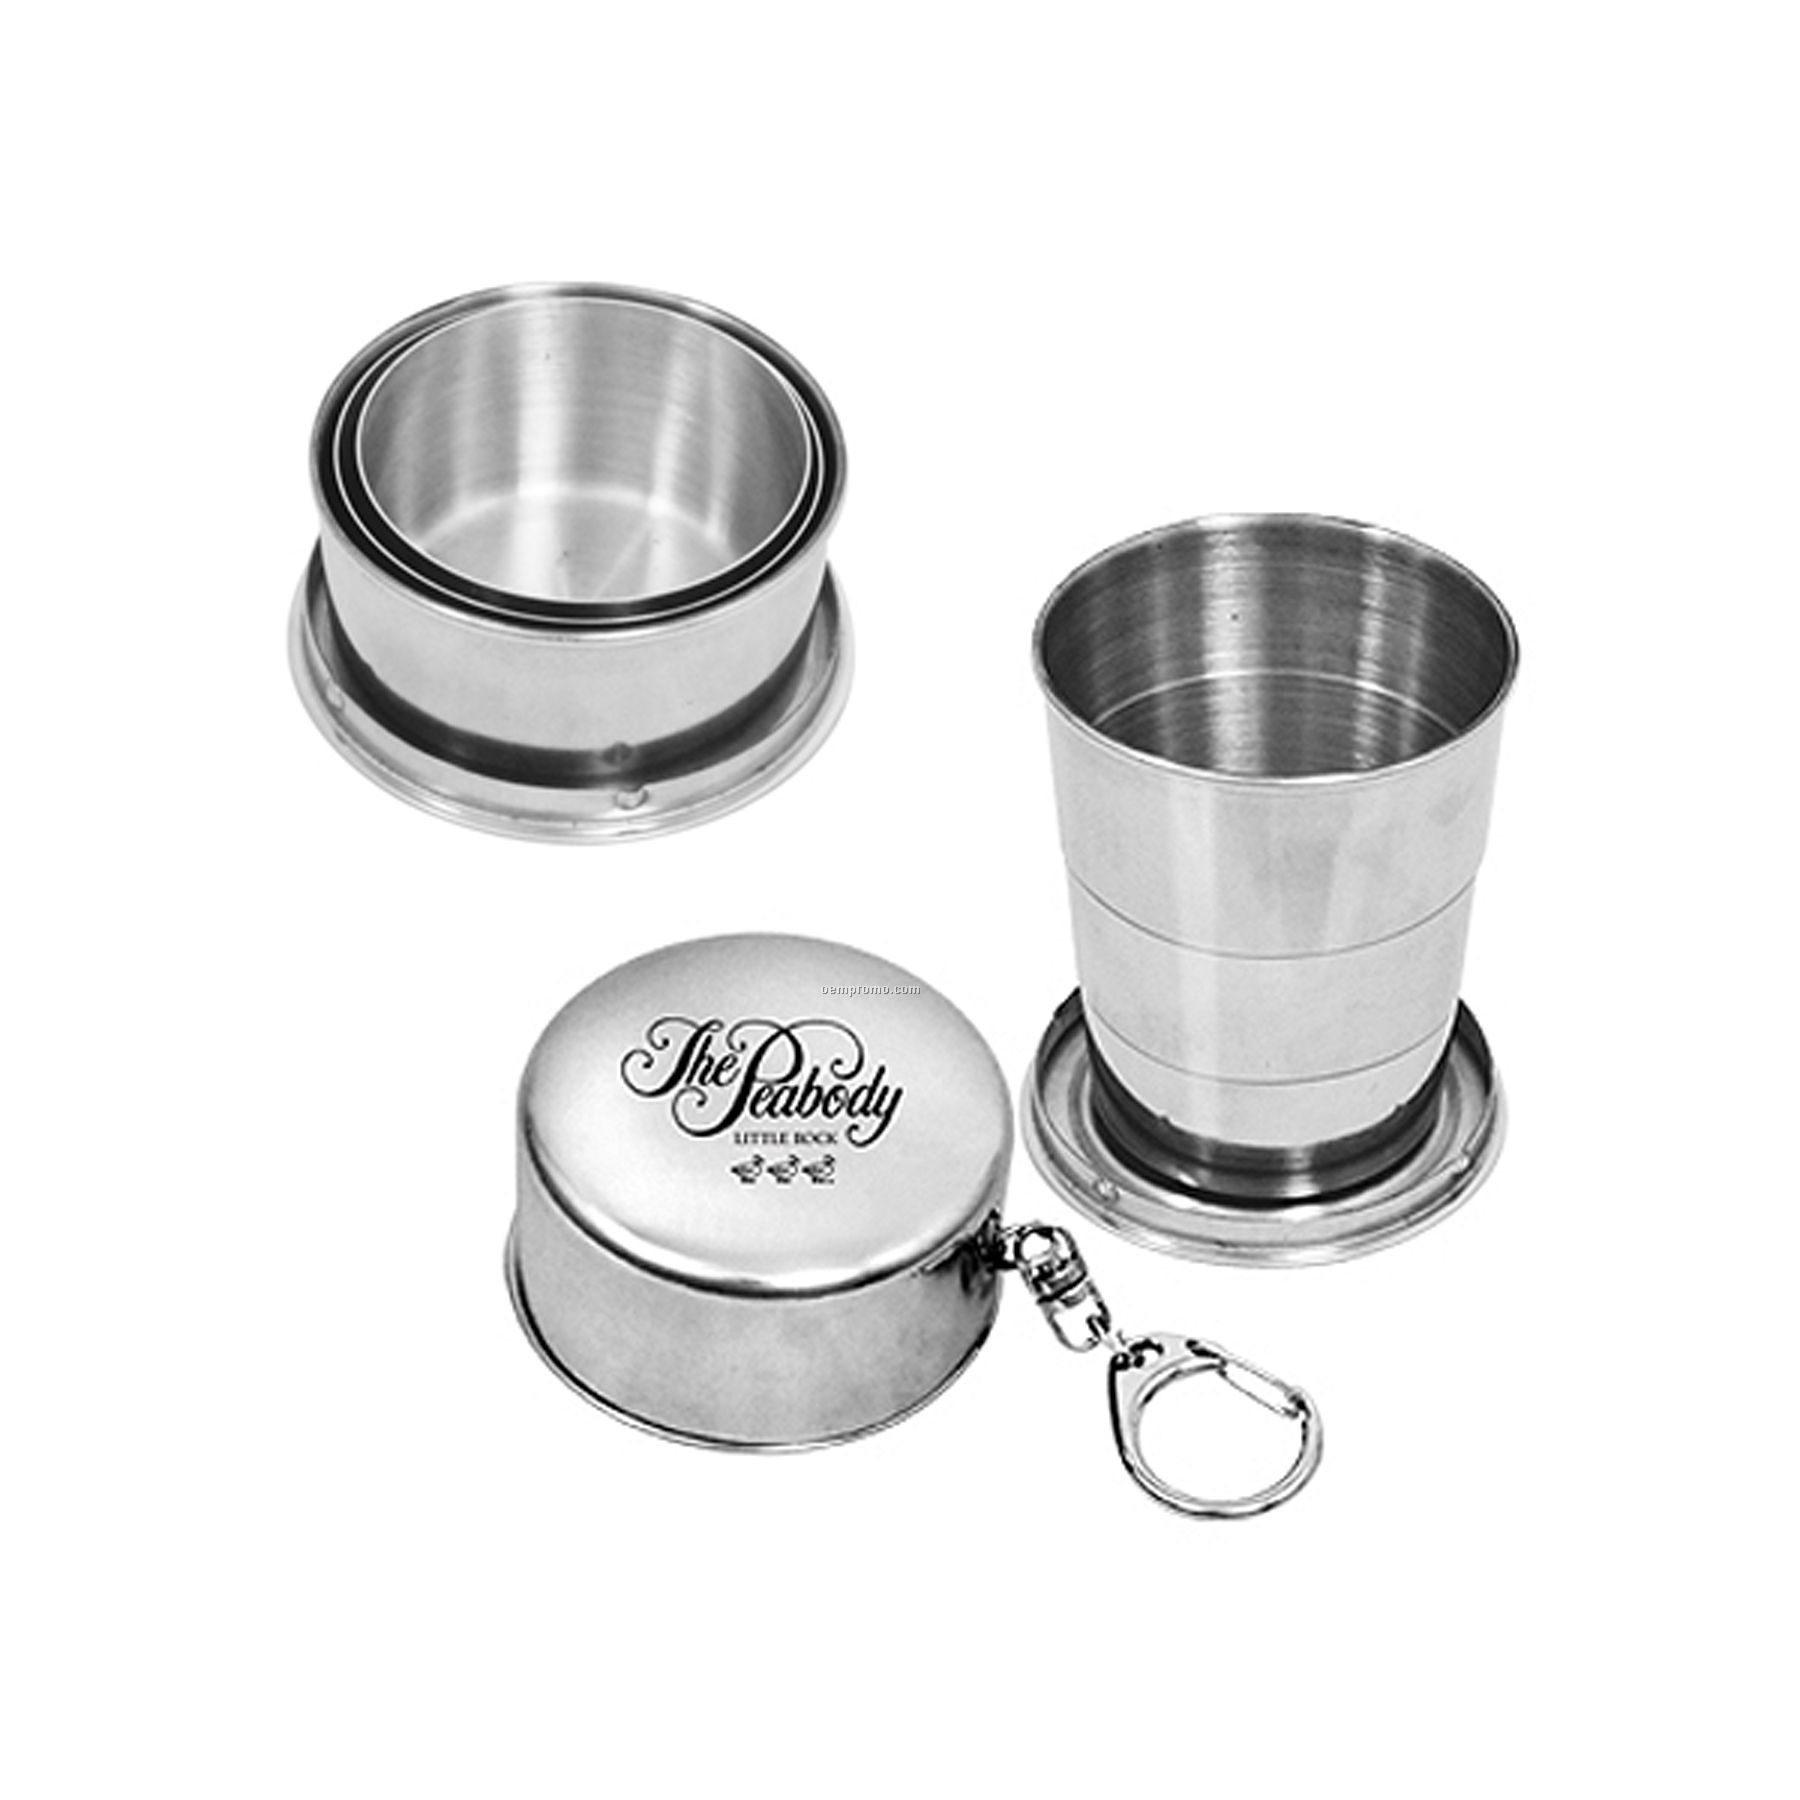 Cavalla 4 Oz Collapsible Cup